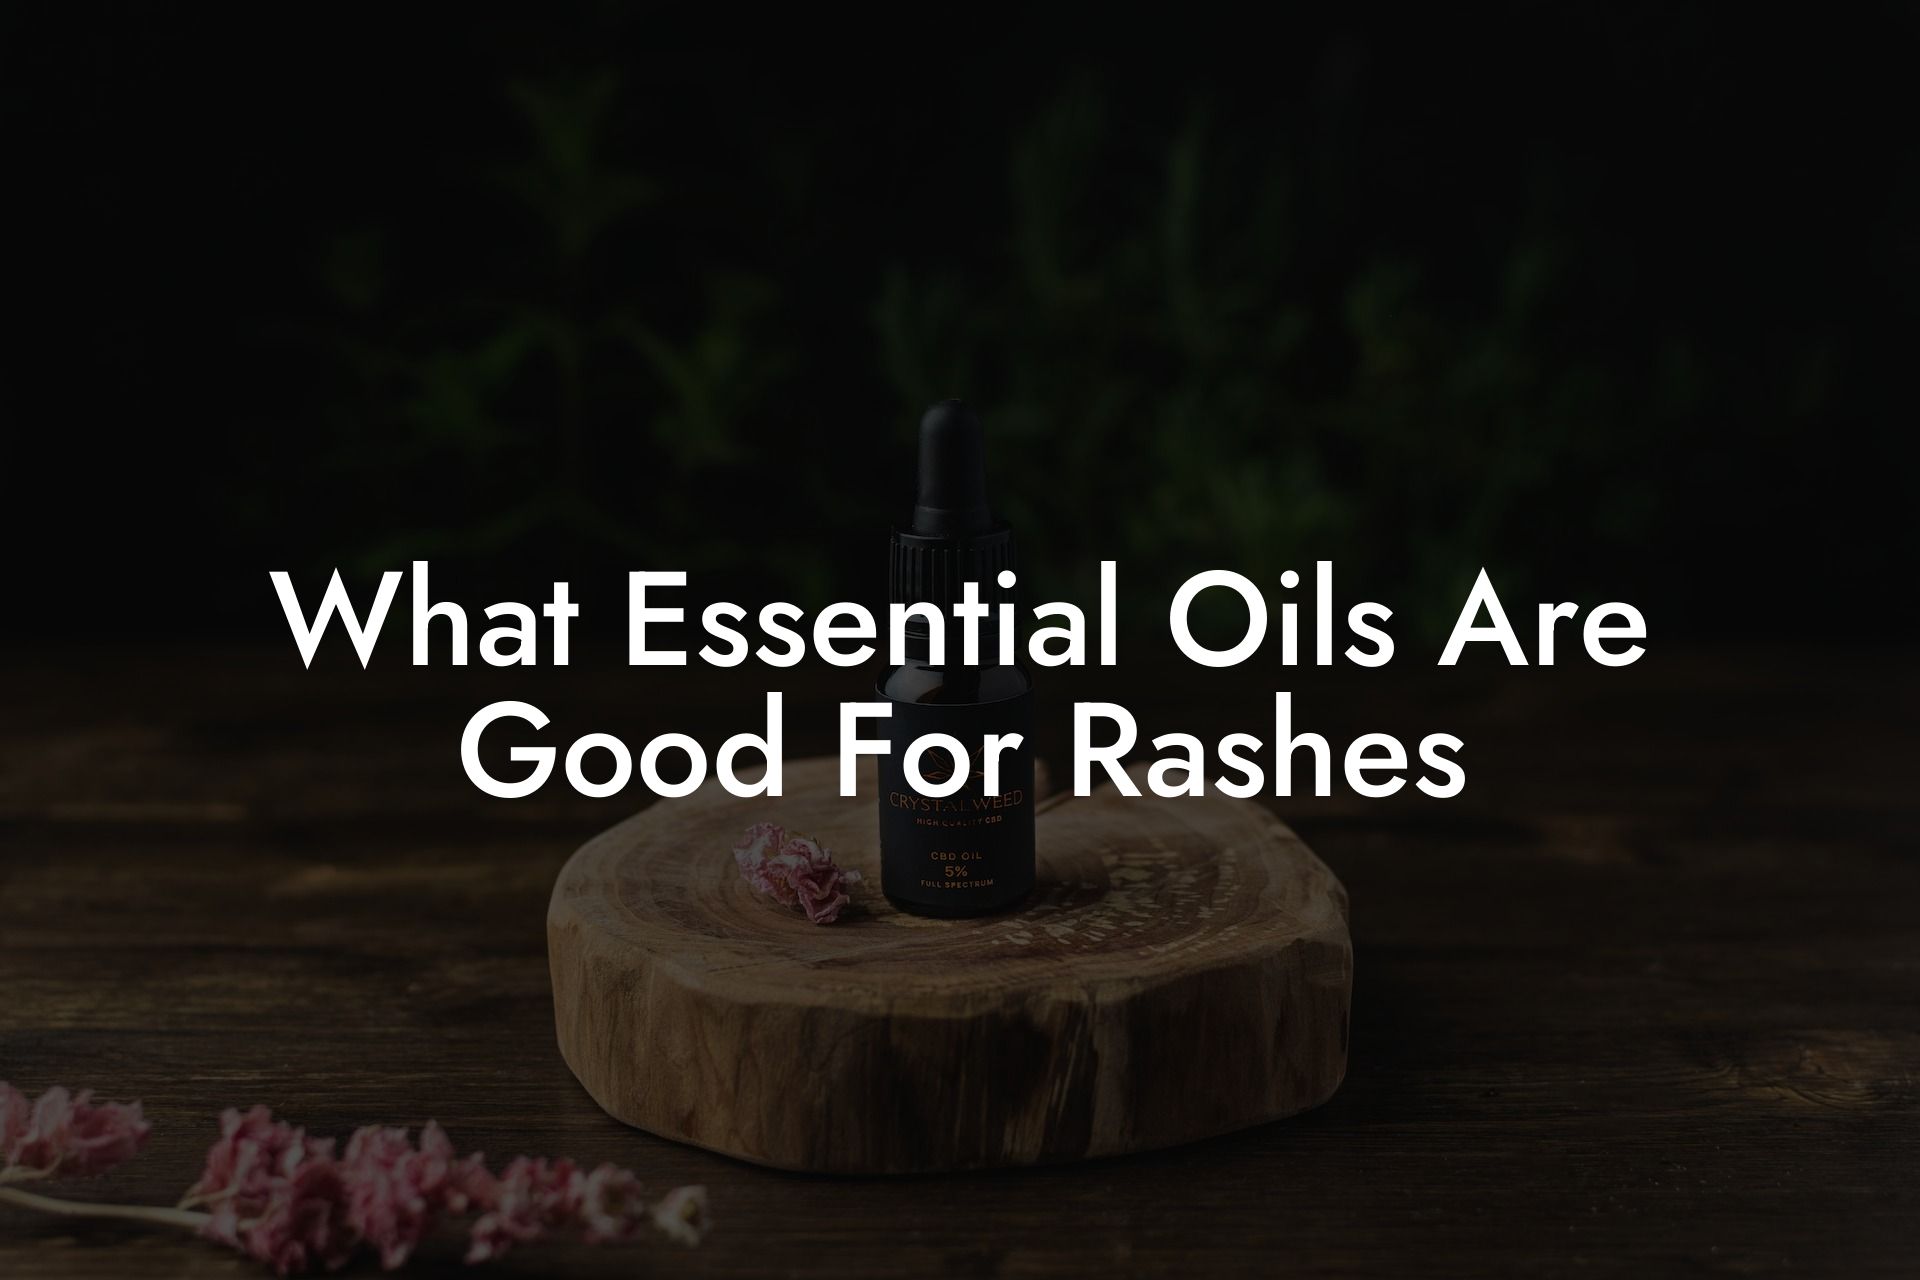 What Essential Oils Are Good For Rashes